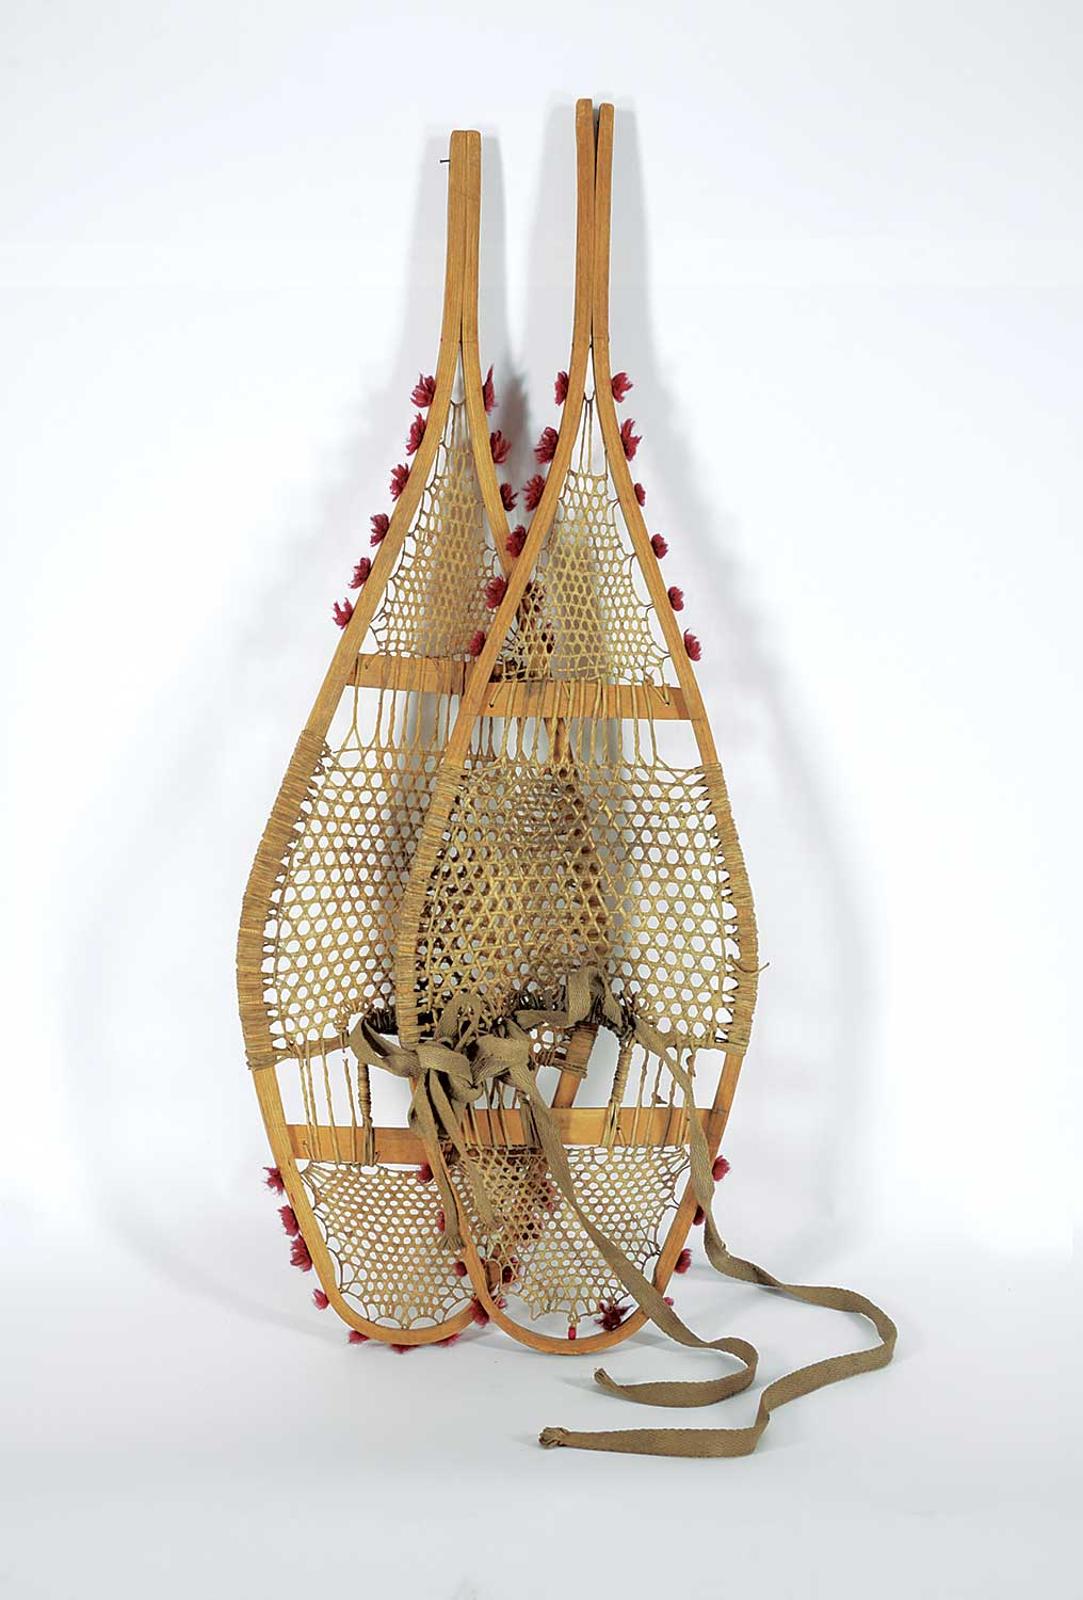 First Nations Basket School - Snowshoes